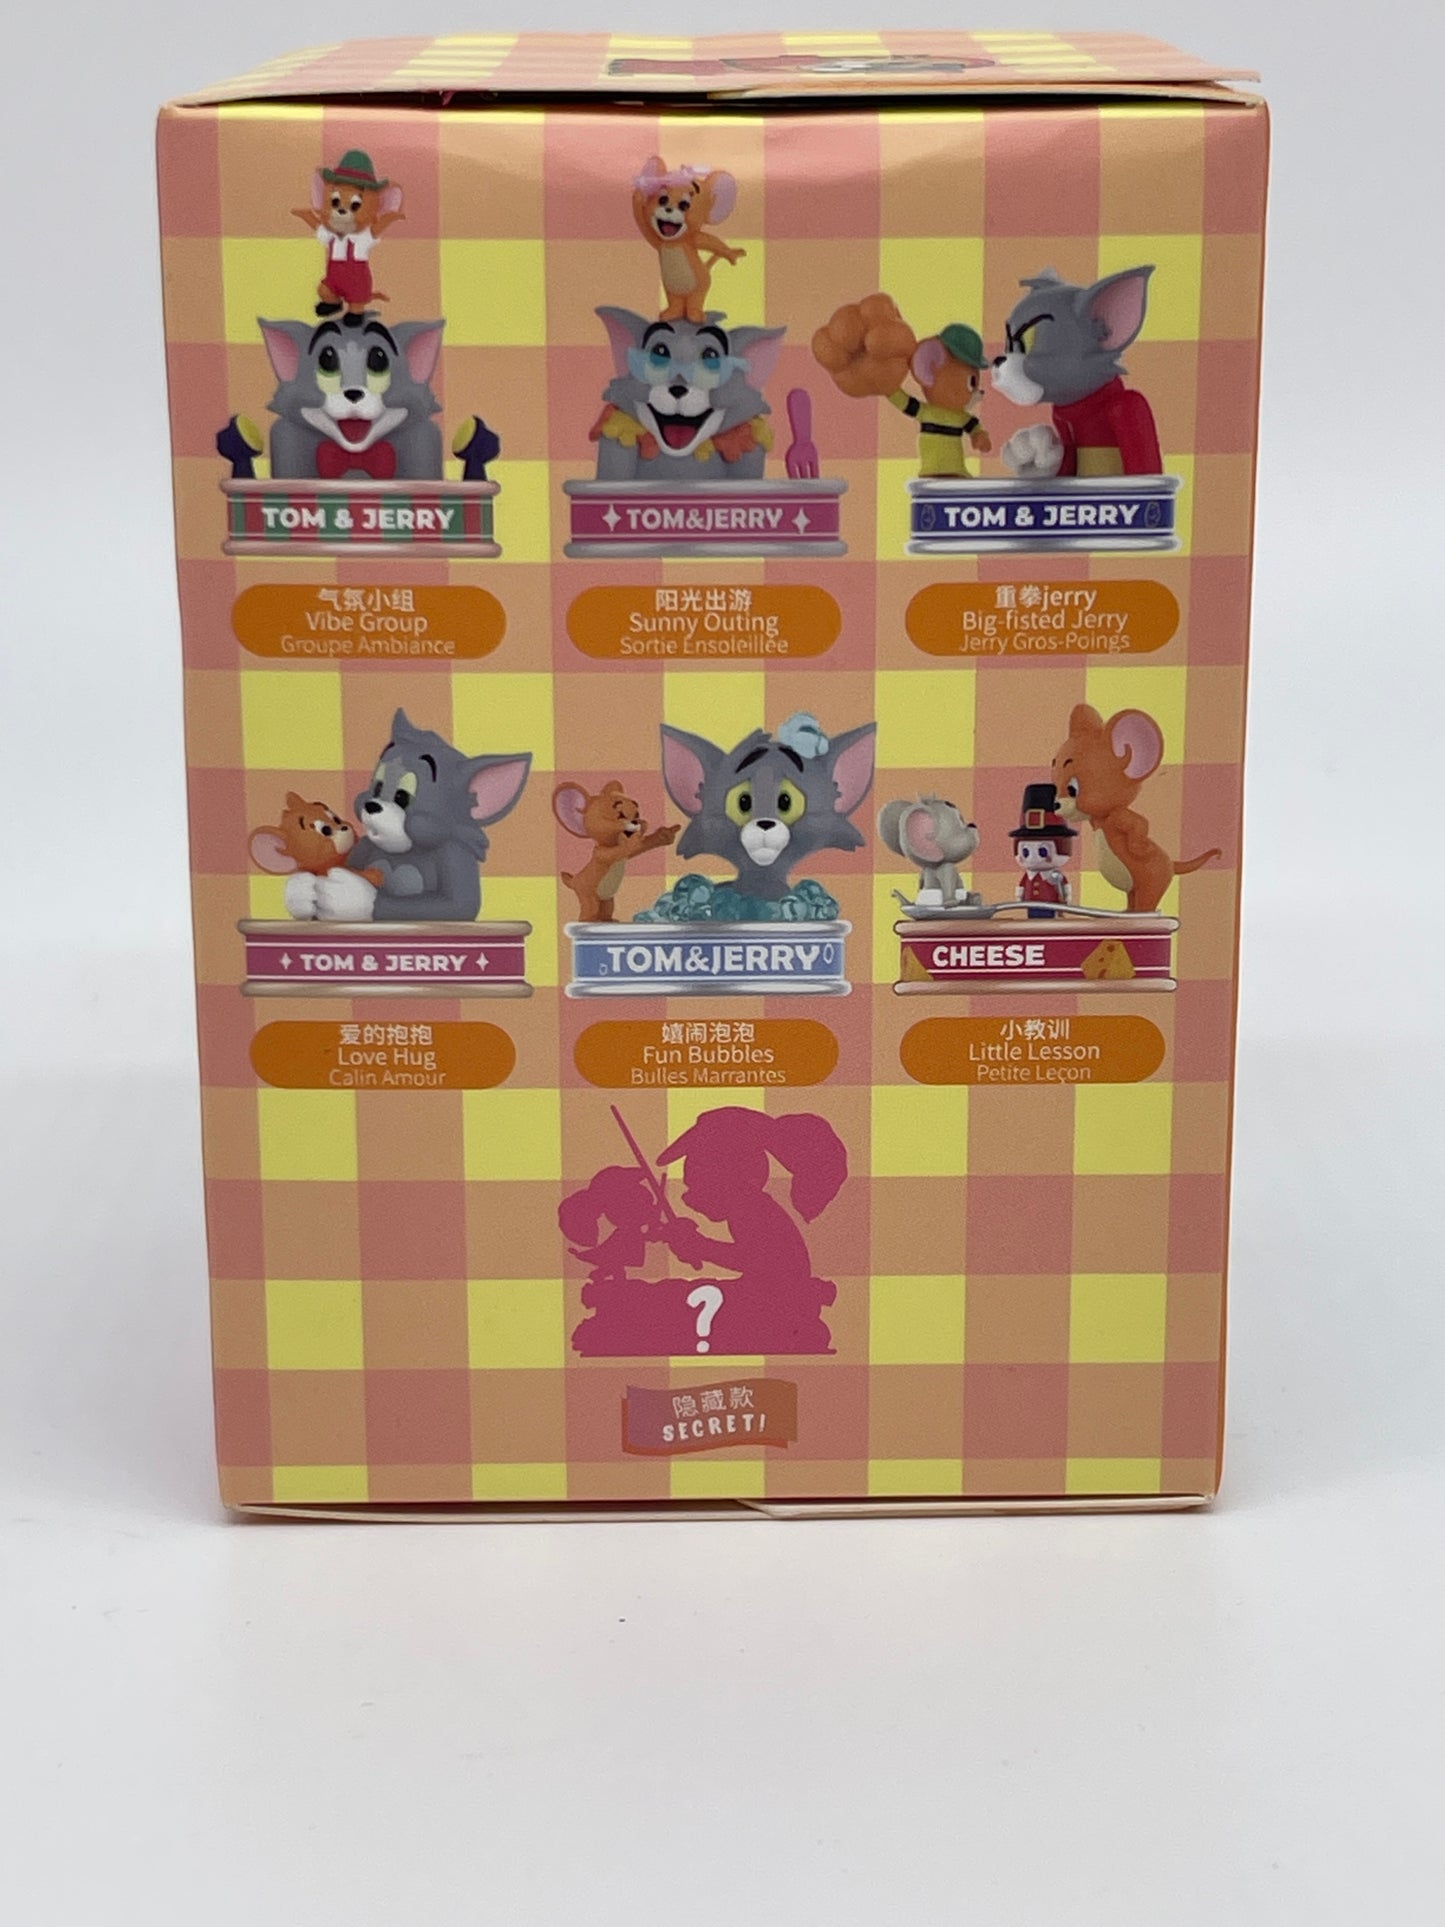 MINISO Japan "Tom &amp; Jerry Can Collection" blind box 7 different figures